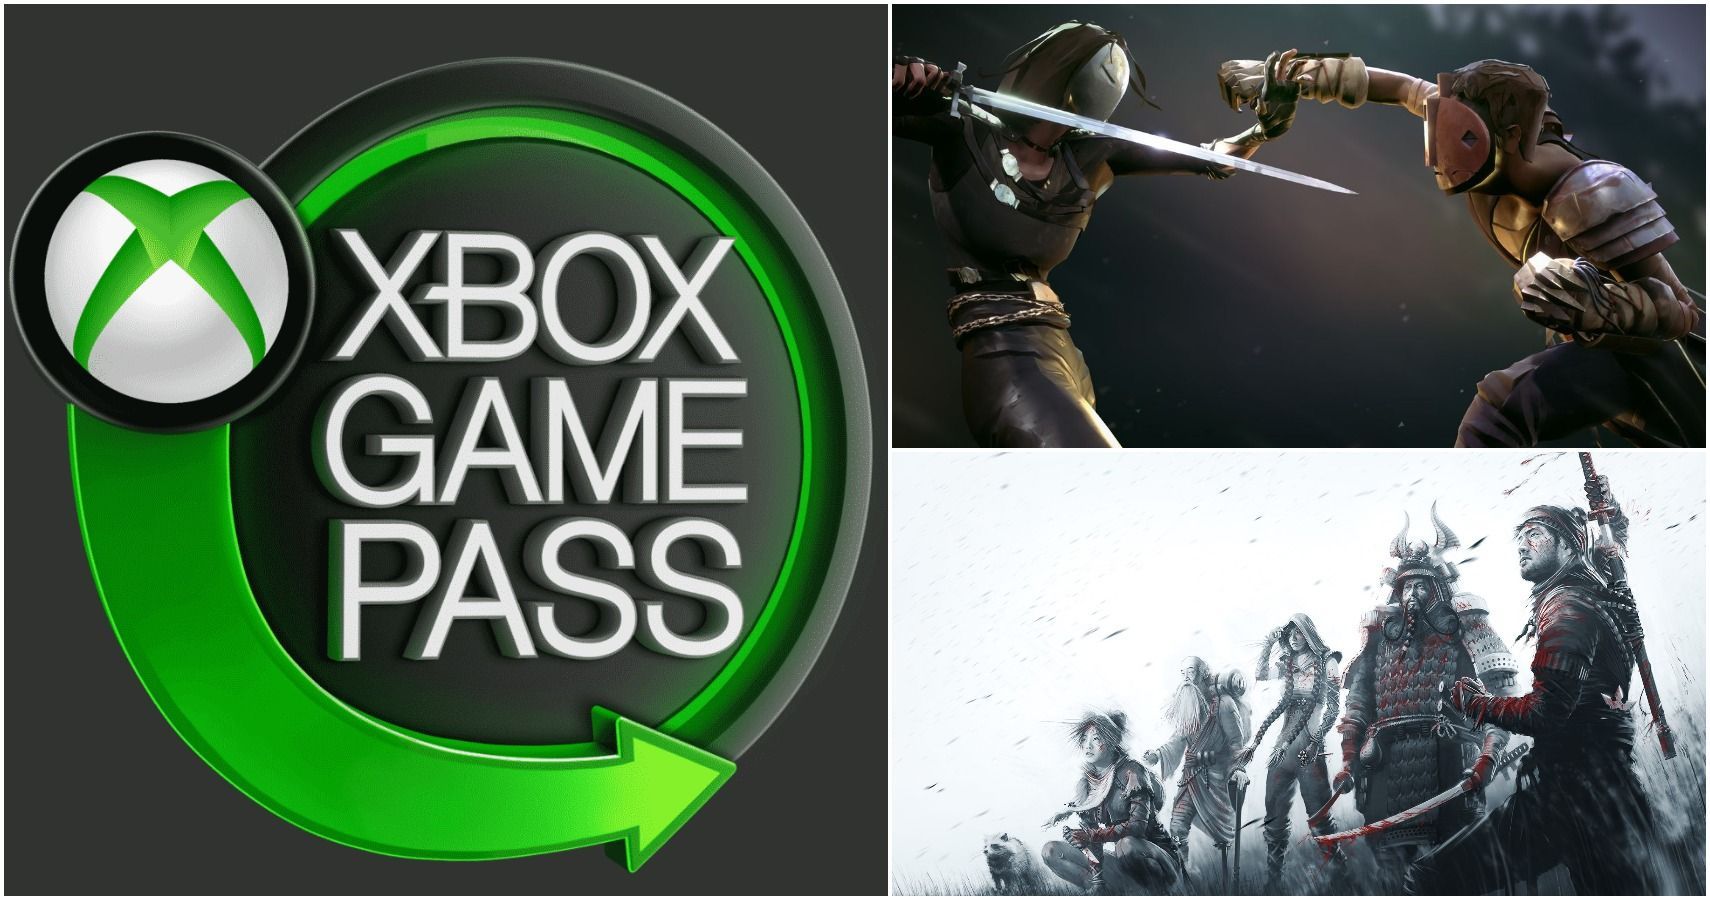 cancel game pass on xbox